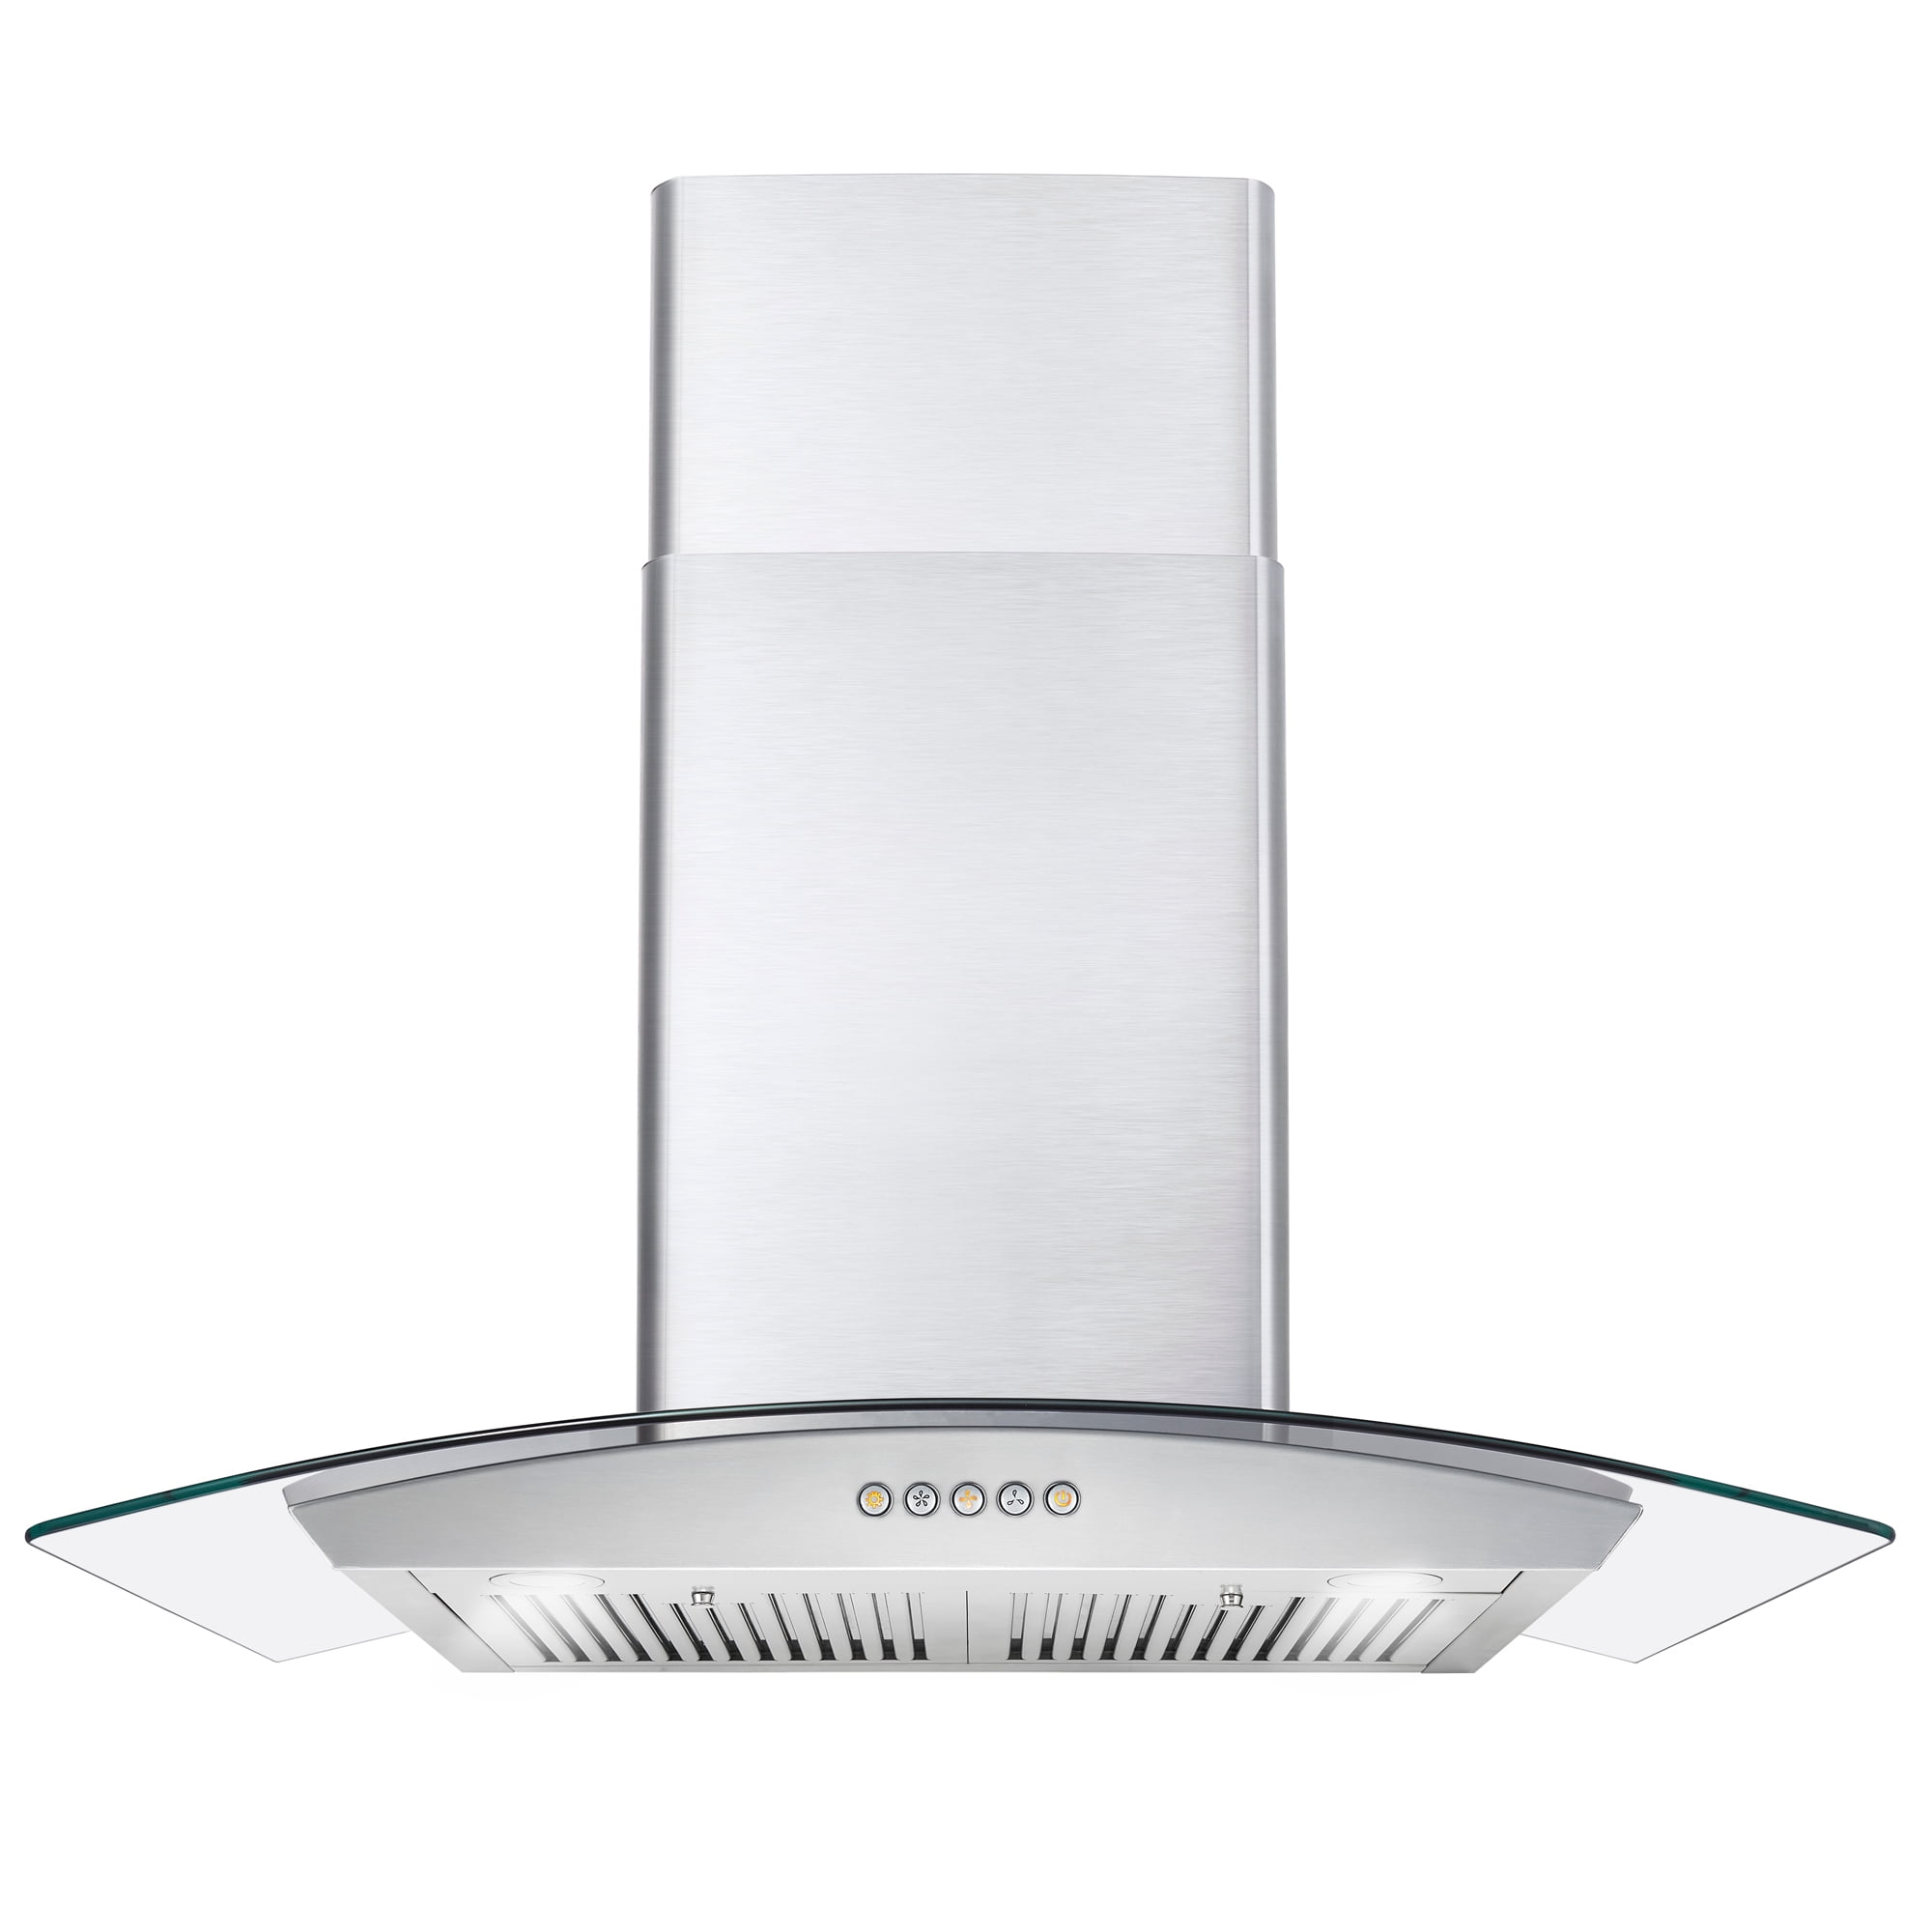 Broan-NuTone EW4830SS Stainless Steel LED, 400 30-inch Wall-Mount  Convertible Chimney-Style Range Hood with 3-Speed Exhaust Fan and Light,  460 Max